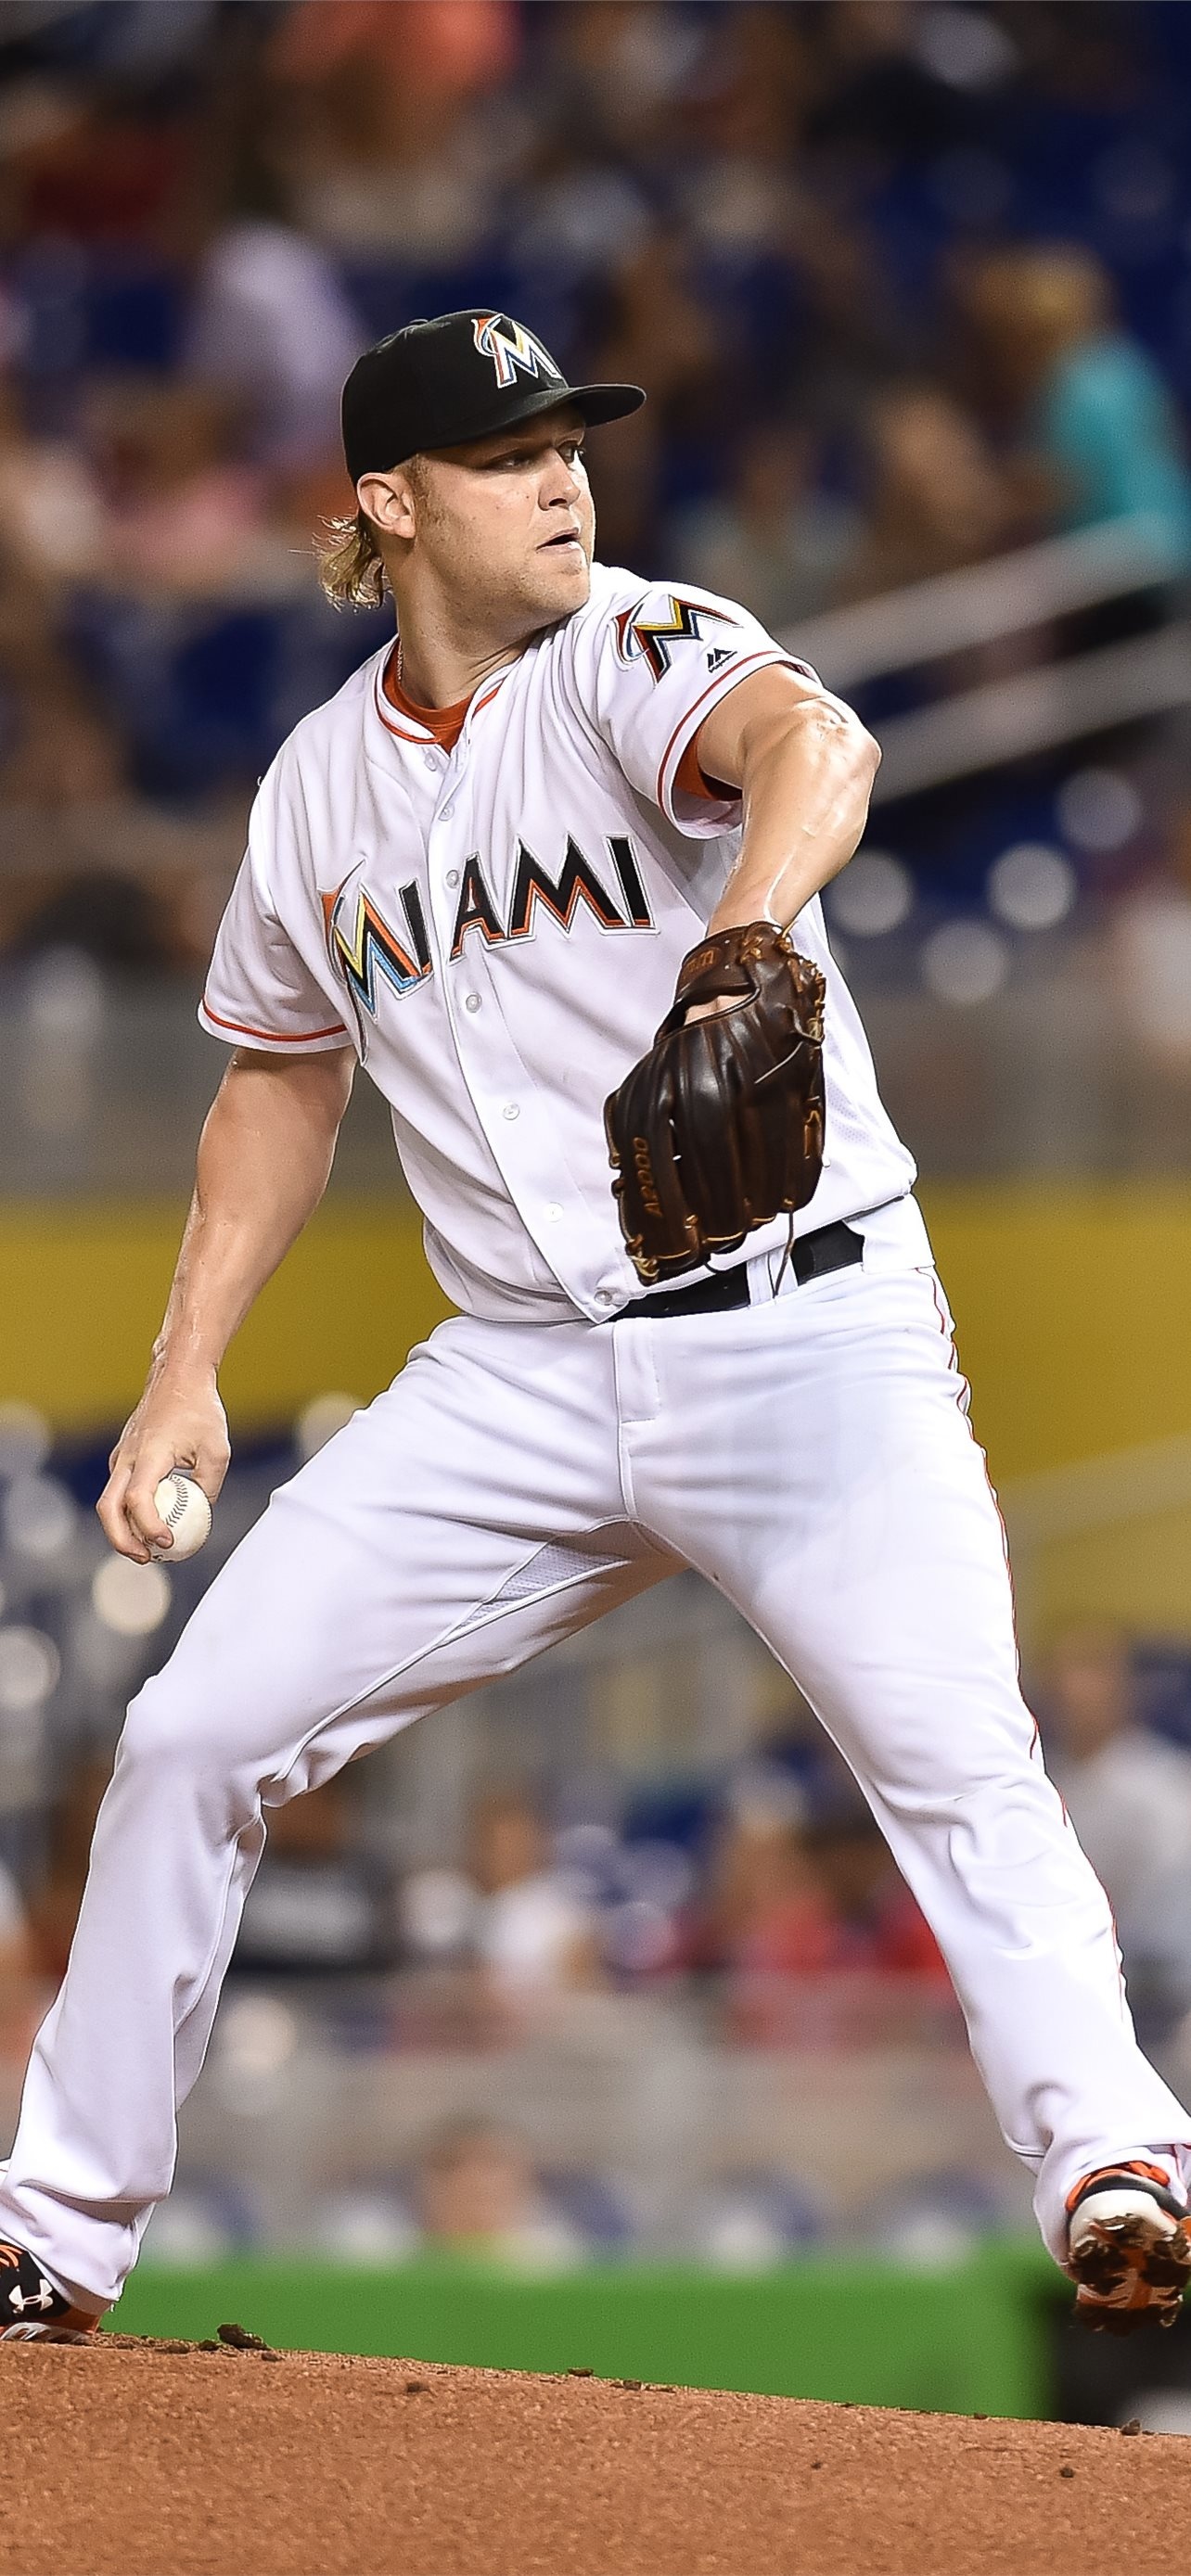 Miami Marlins, iPhone wallpapers, Sports team, Fan loyalty, 1290x2780 HD Phone